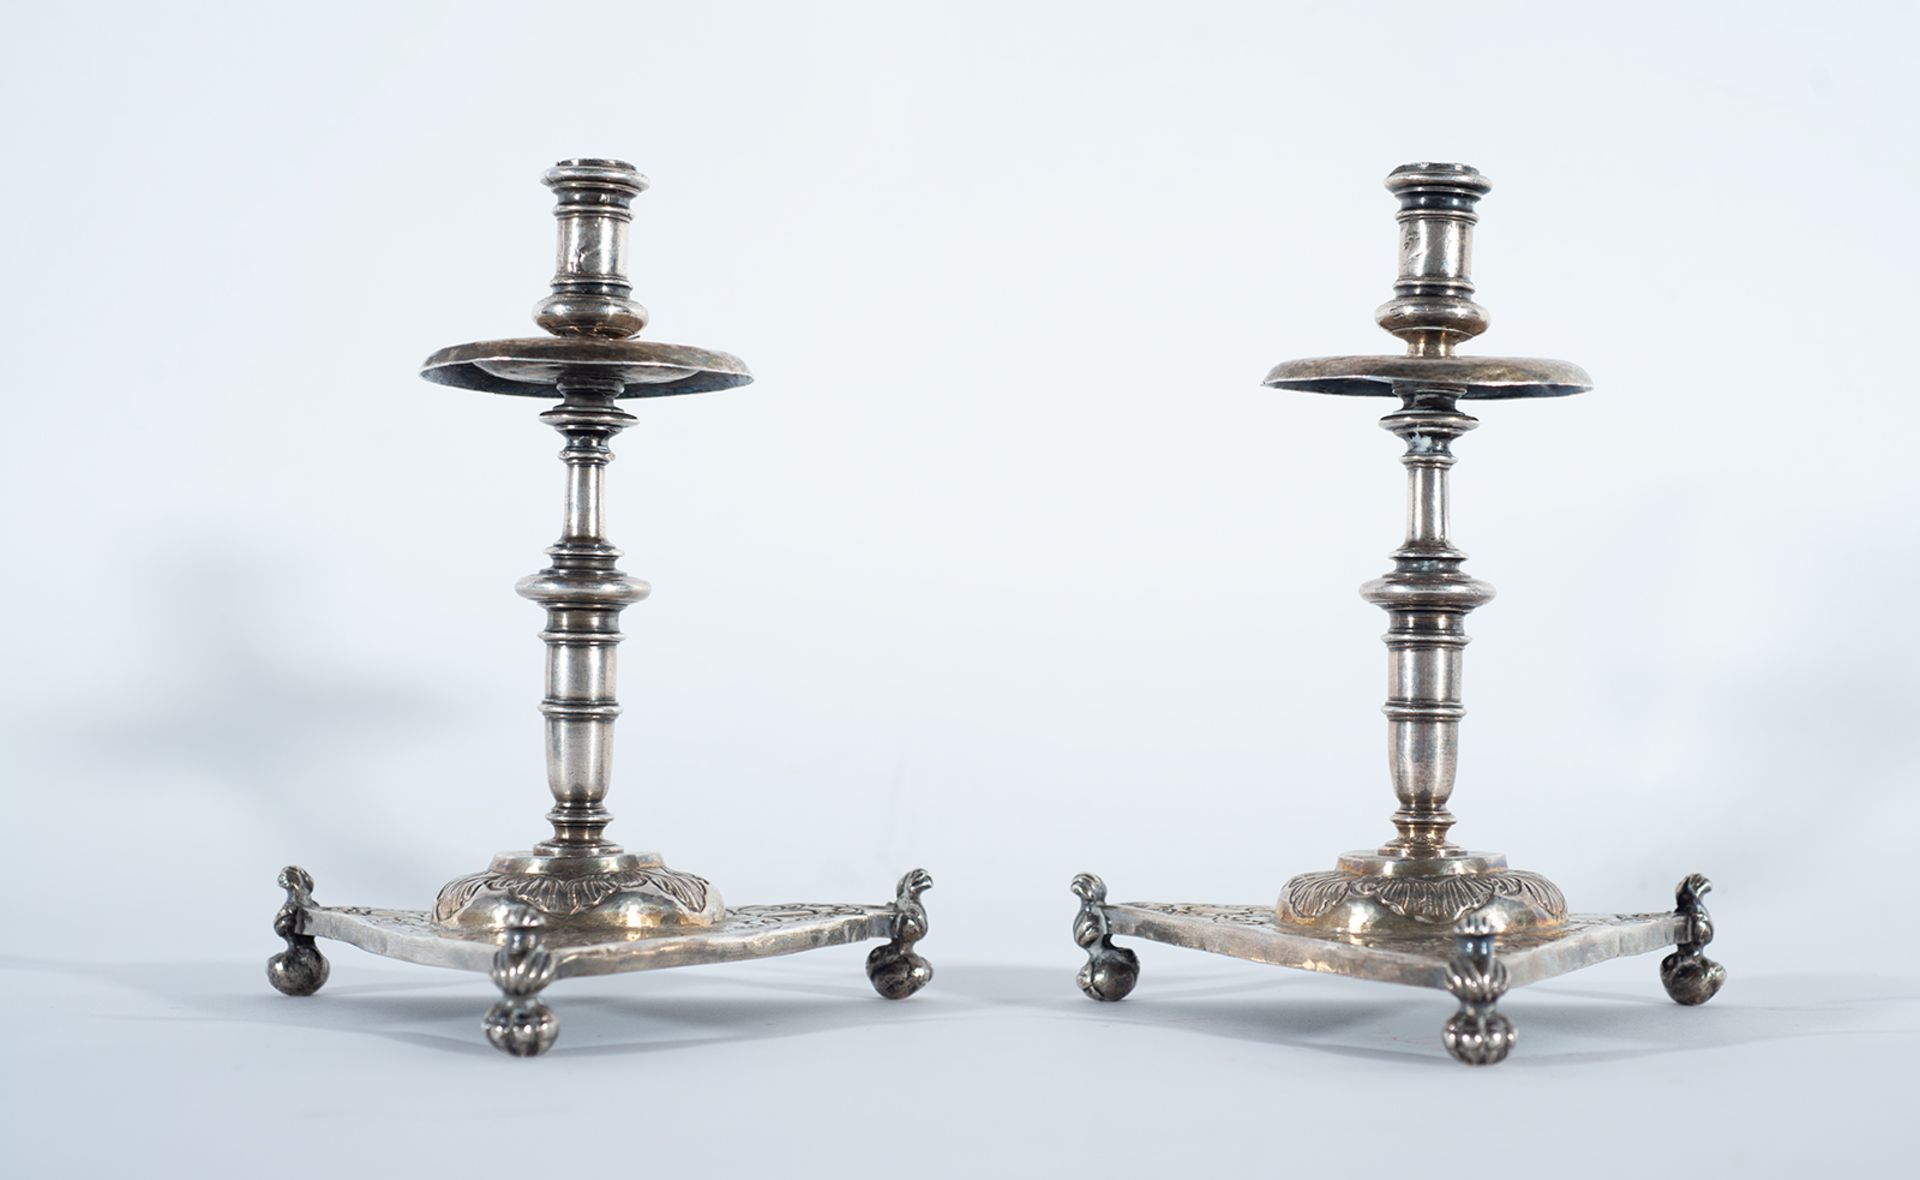 Exceptional pair of silver Plateresque candlesticks, Spain, 16th century